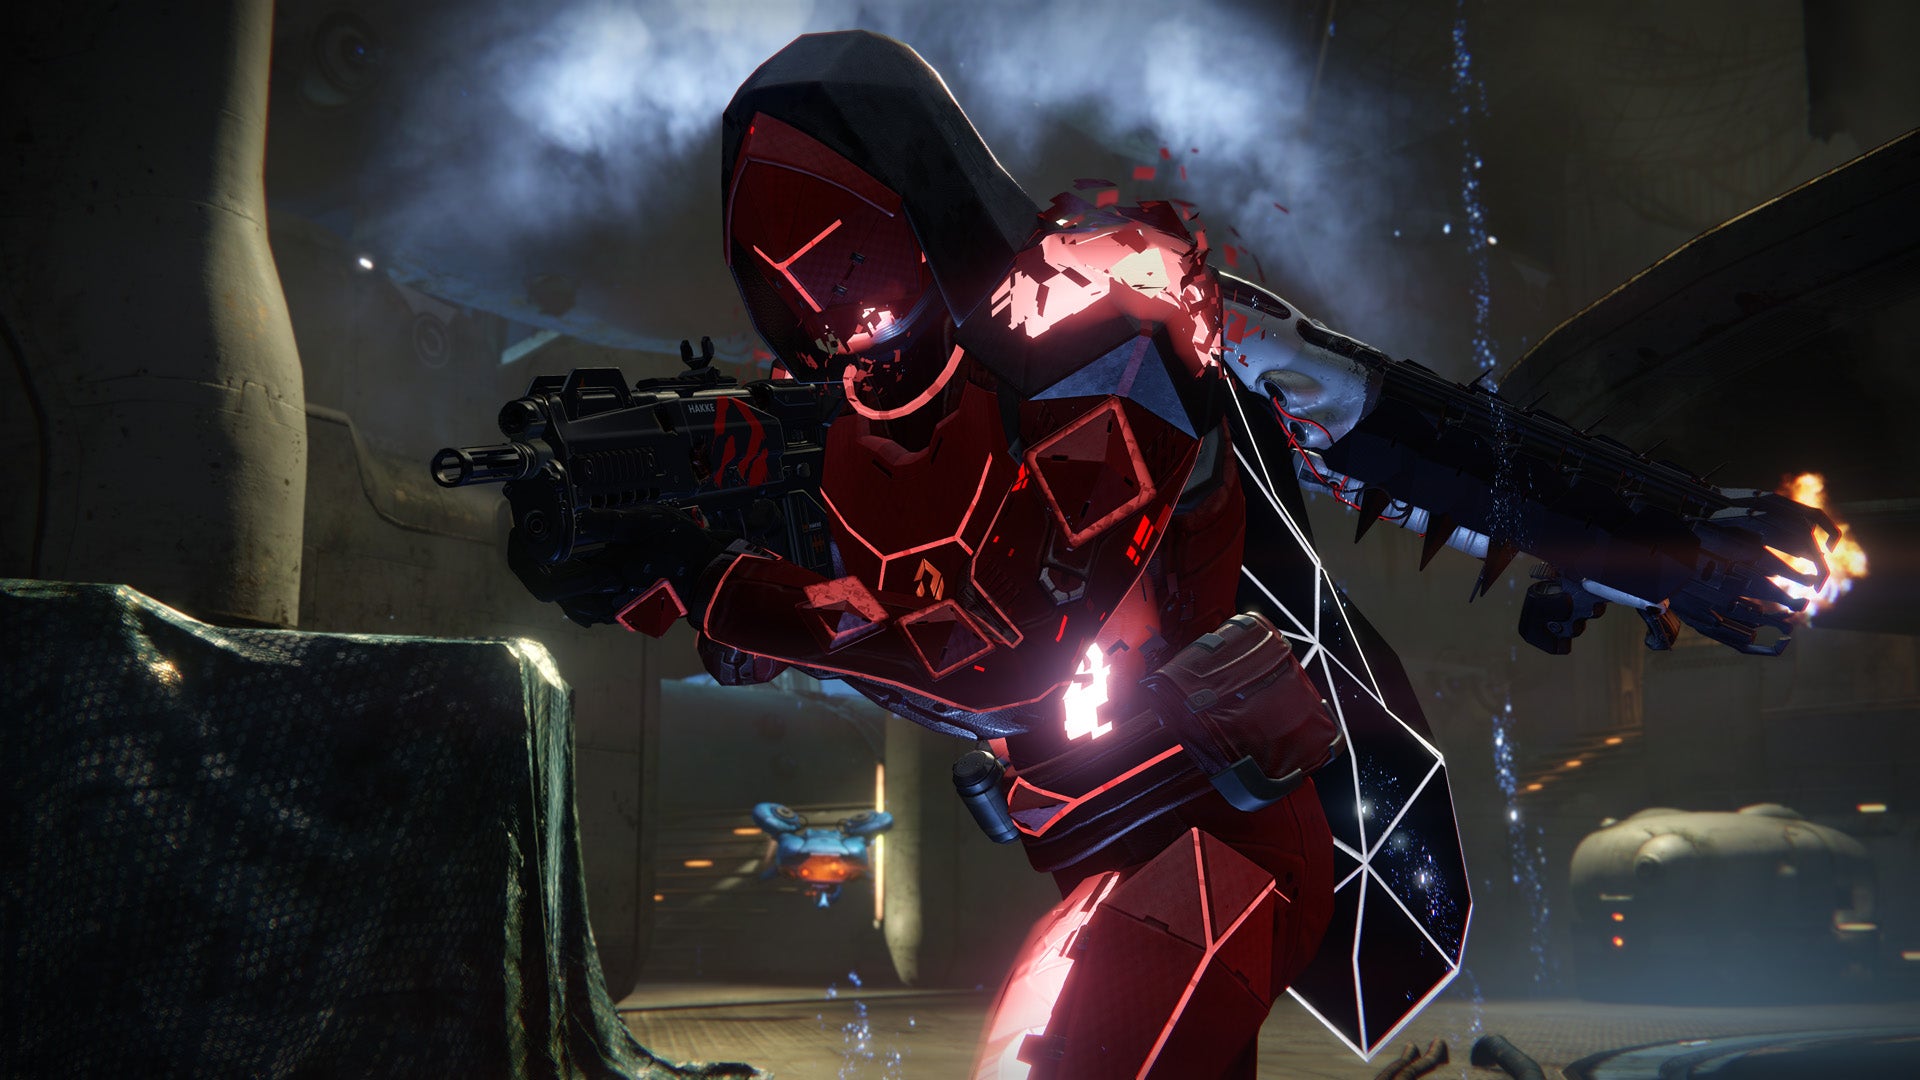 Image for Destiny weekly reset for August 22 – Nightfall, Crucible, Challenge of Elders, featured raid changes detailed